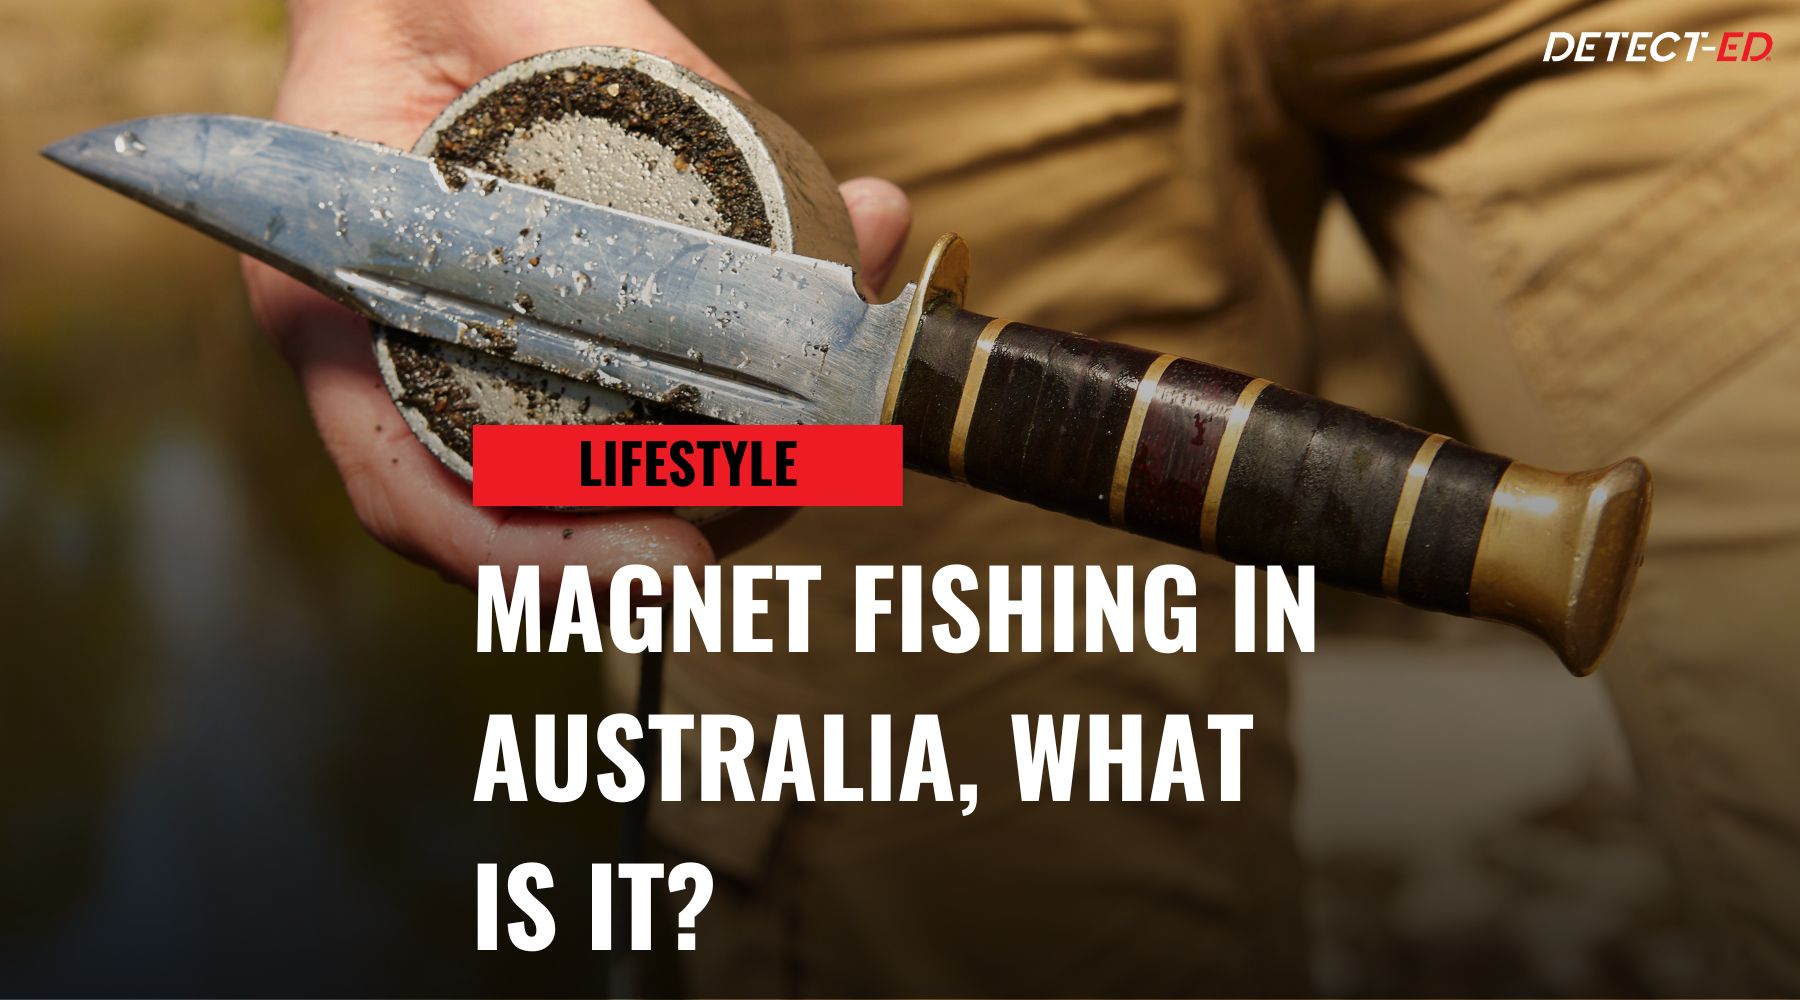 What Will My Giant Magnet Find in the River? (Magnet Fishing) 